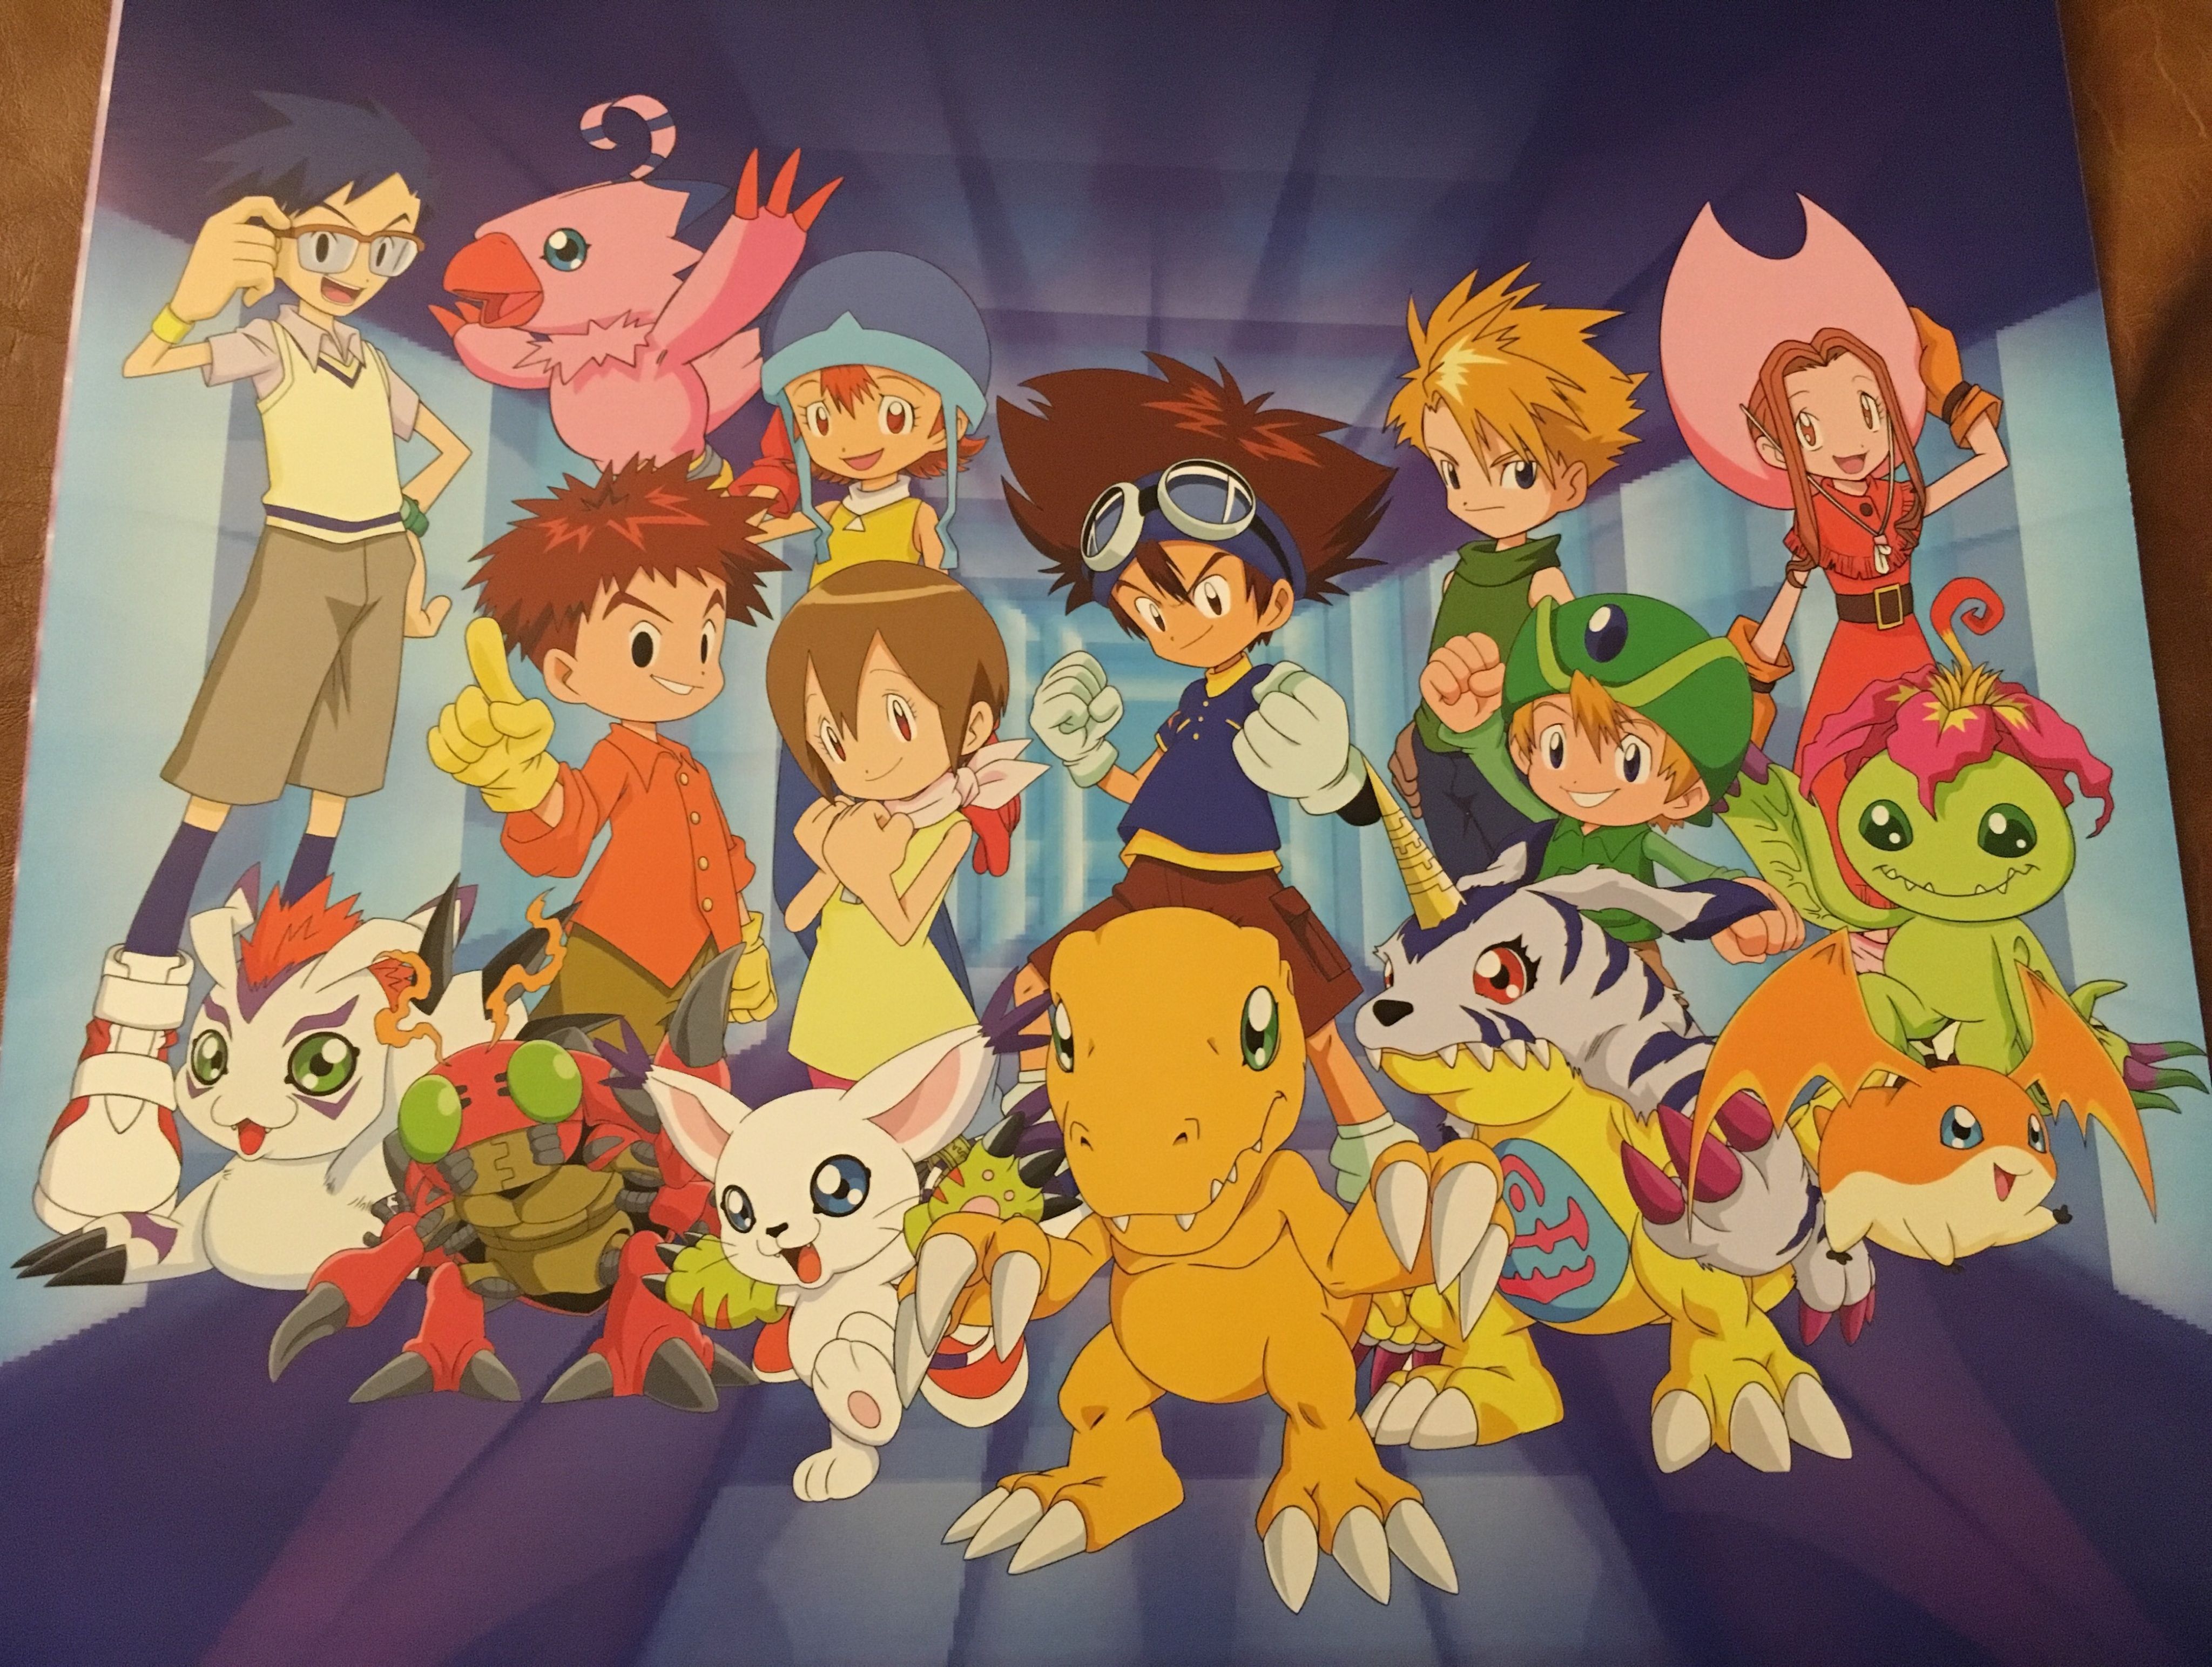 Digimon Adventure 02: The Beginning: 15 Things We'd Love to See